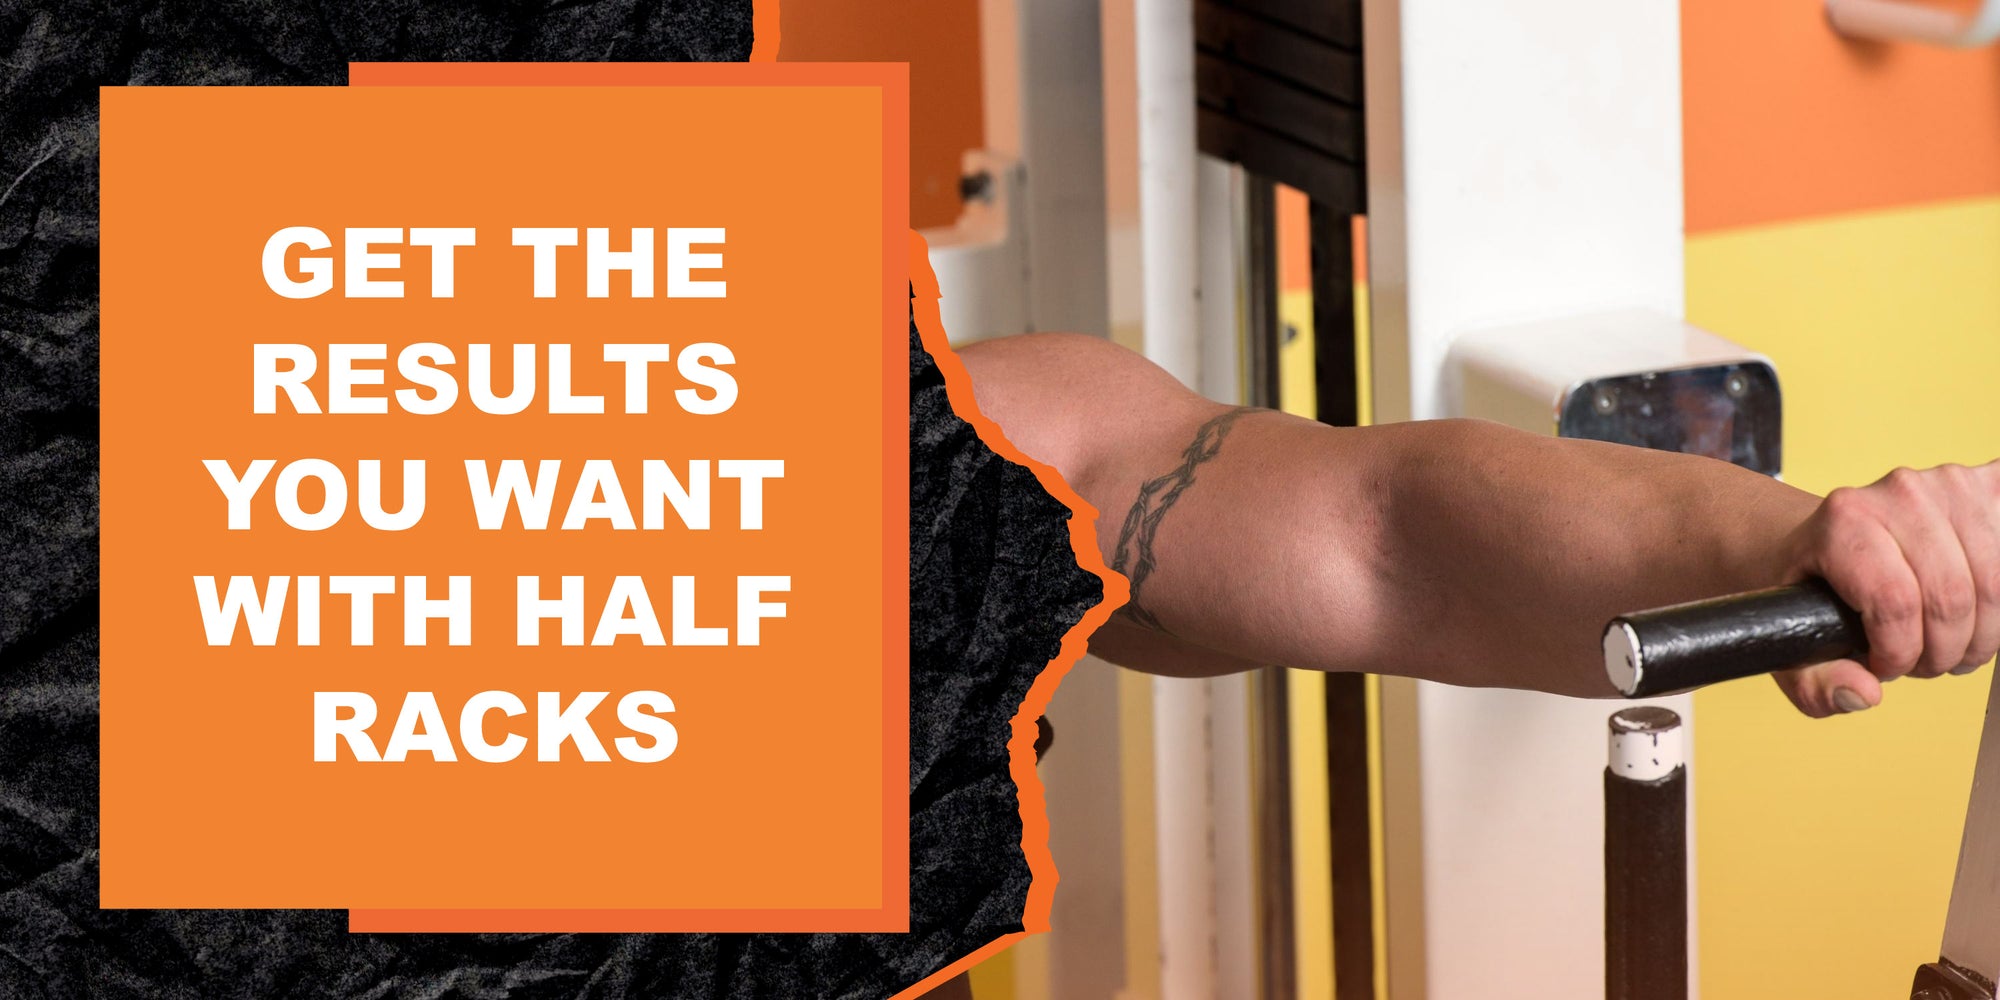 Get the Results You Want with Half Racks